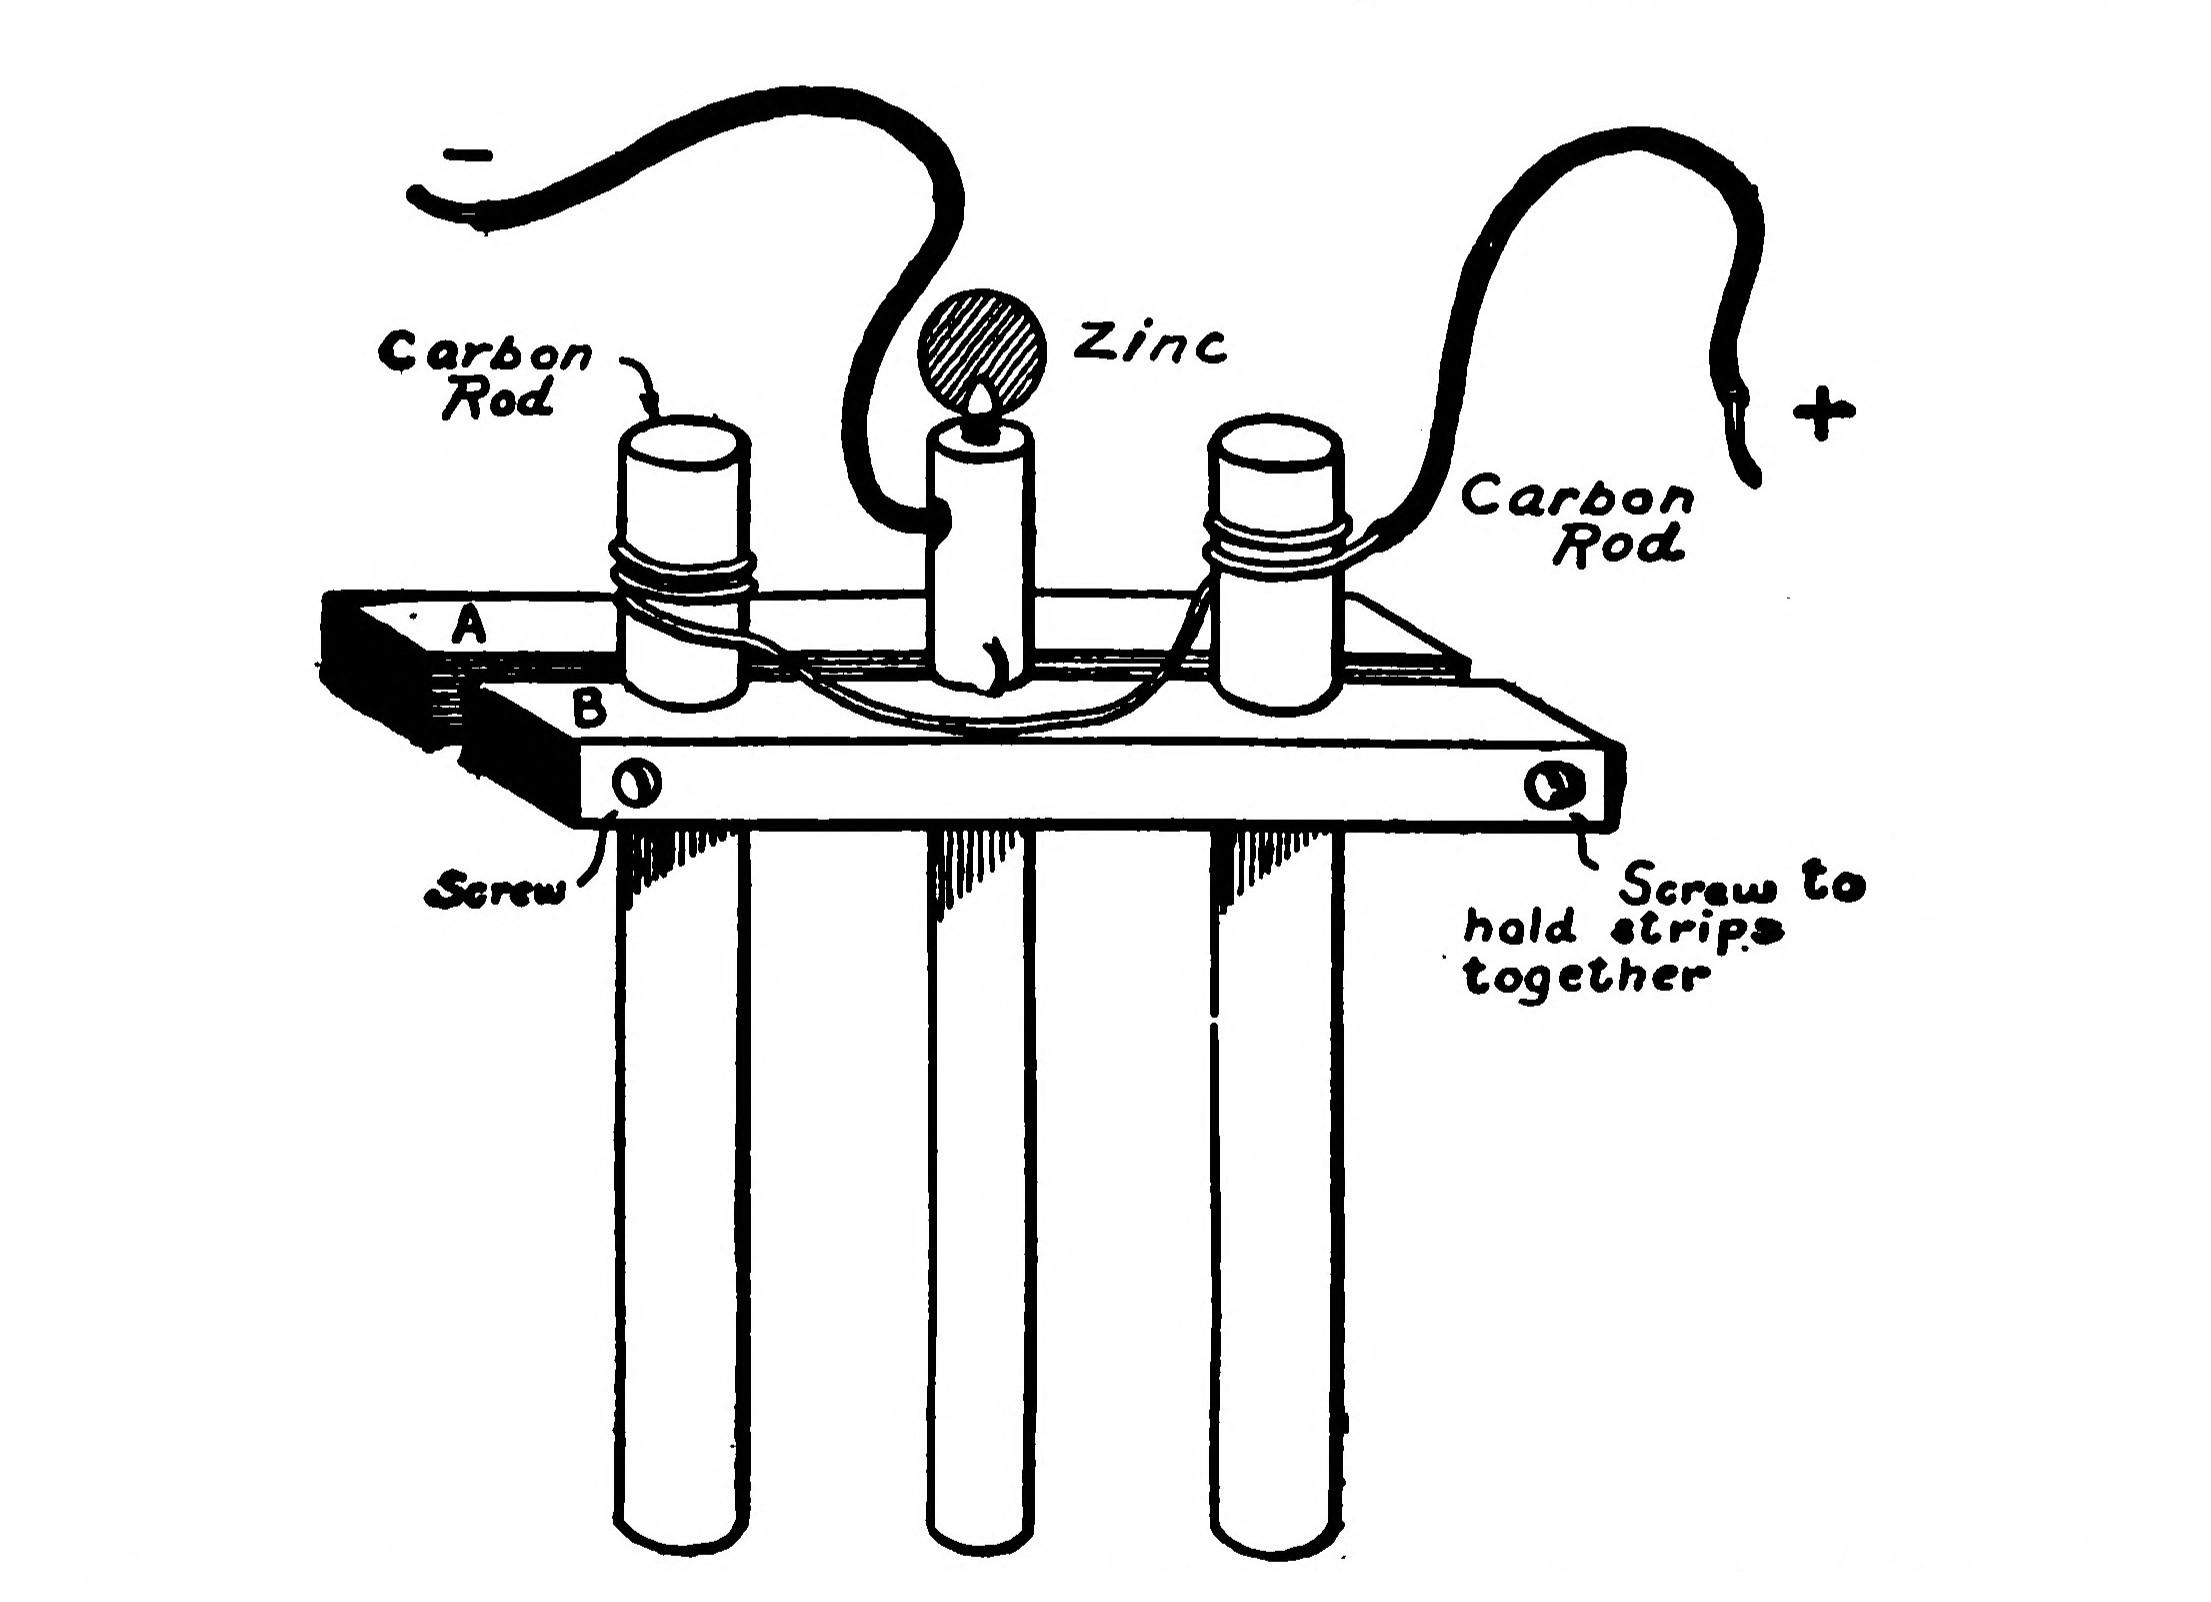 FIG. 30.—The Elements for a Simple Home-made Cell composed of two Carbon Rods and one Zinc Rod clamped between two Wooden Strips.